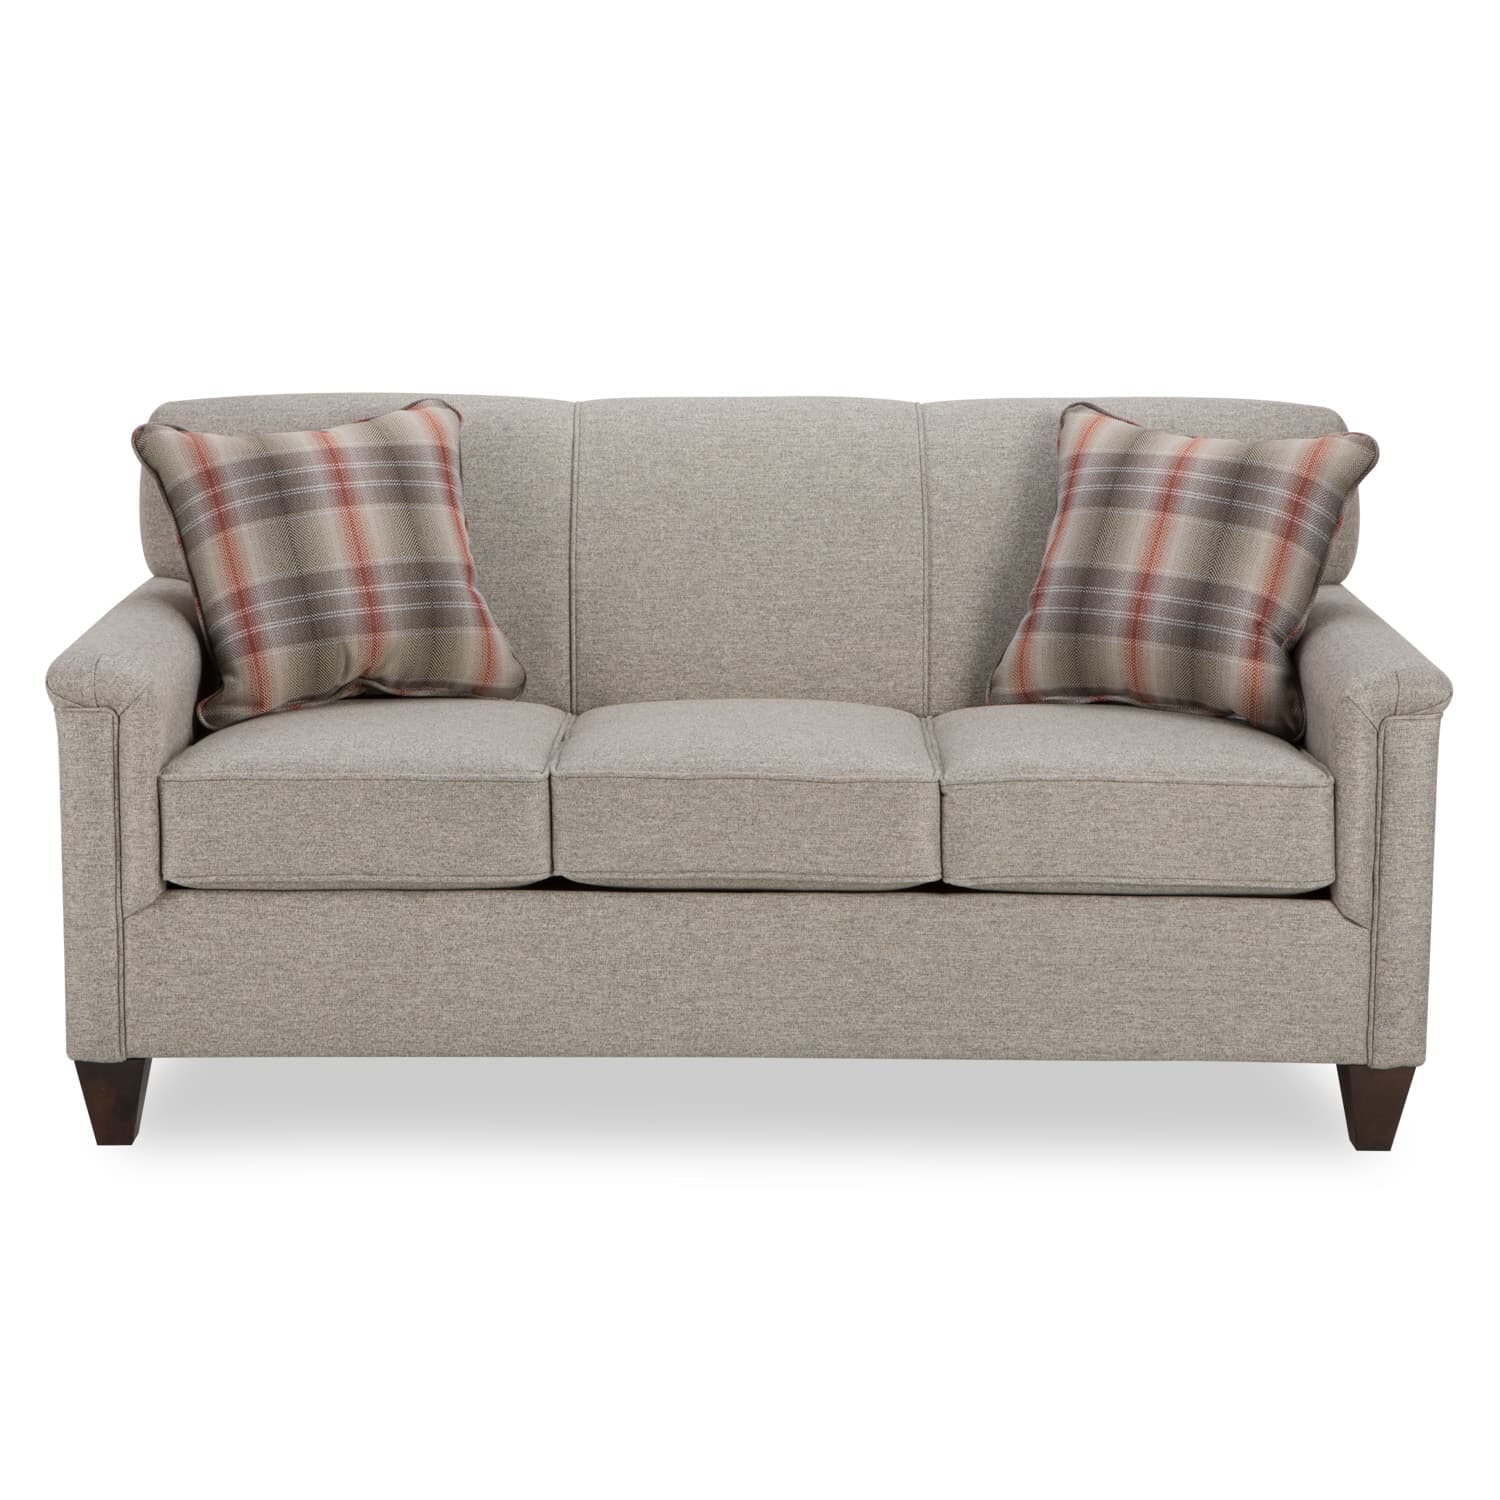 Living Room Sofas | Furniture Sales from WG&R in Wisconsin